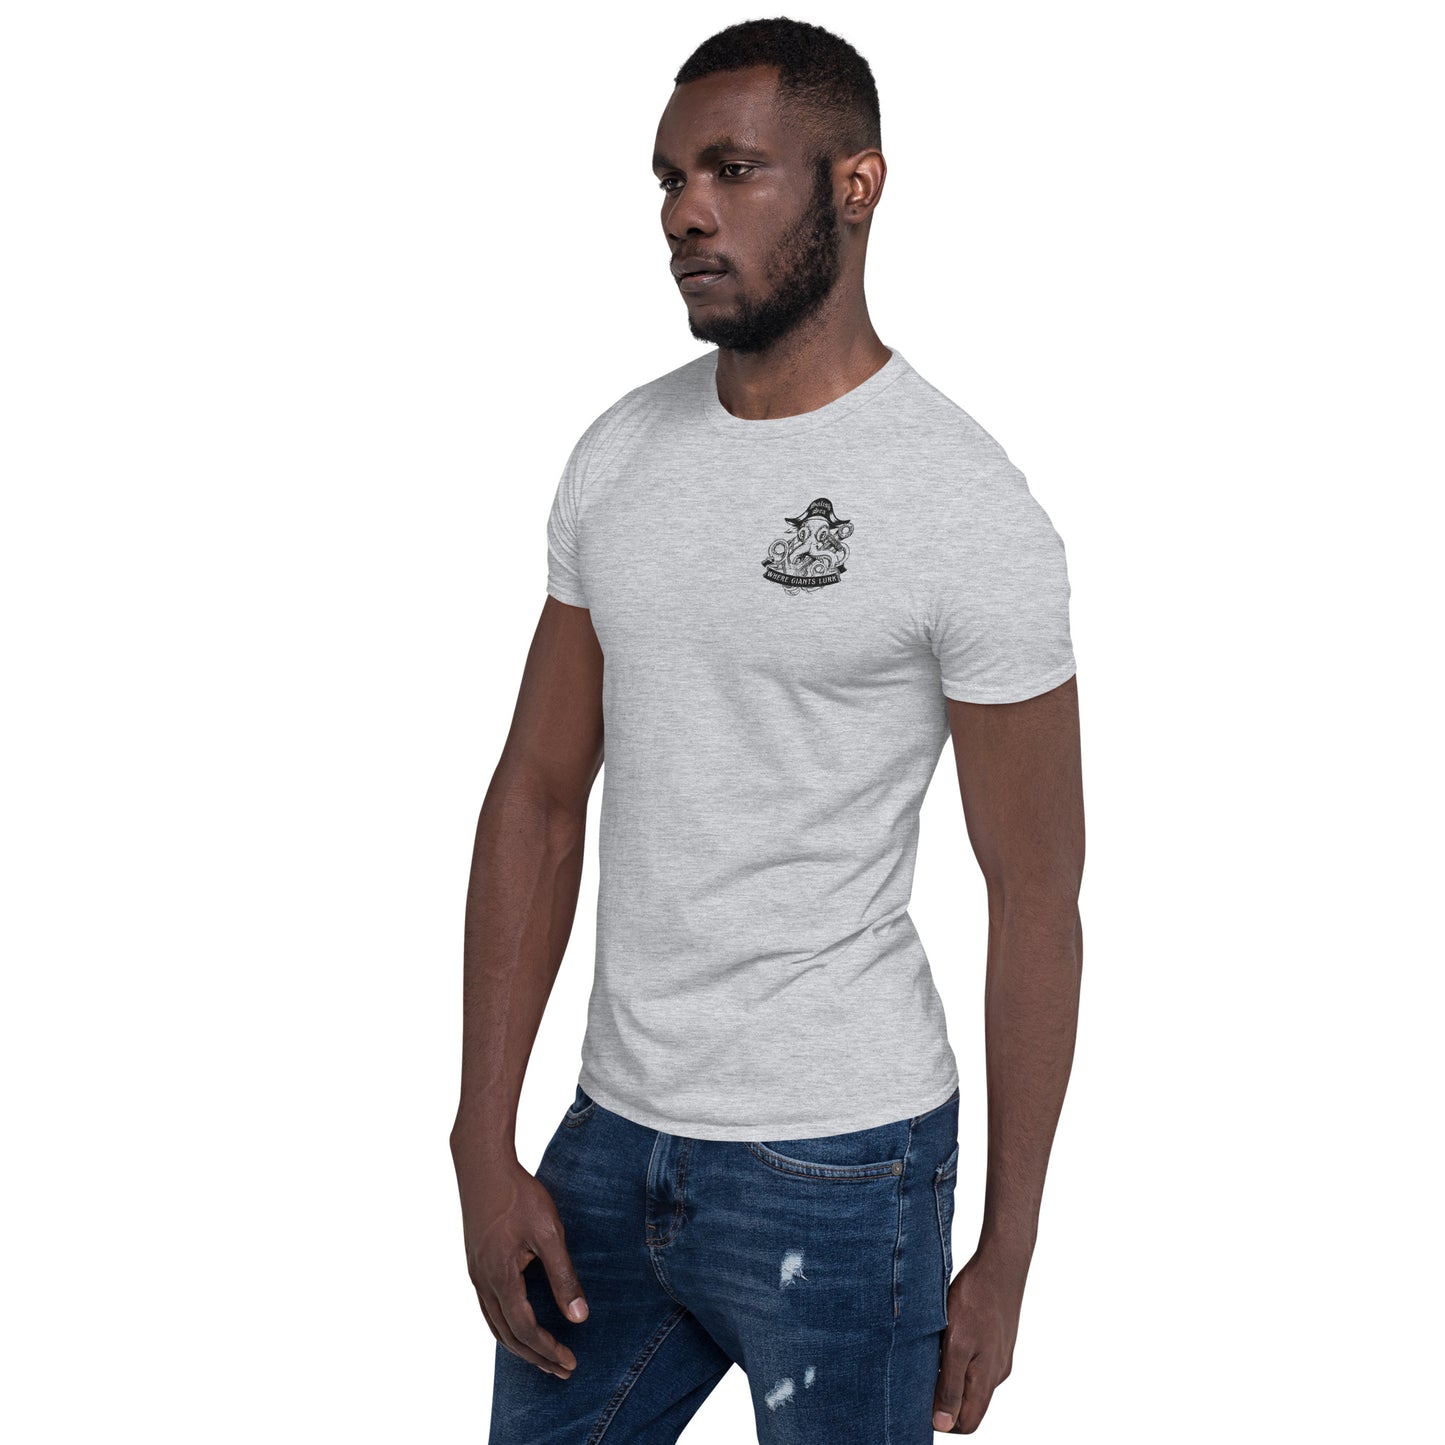 Adult - "Octo Pirate" - Embroidered Short-Sleeve Unisex T-Shirt